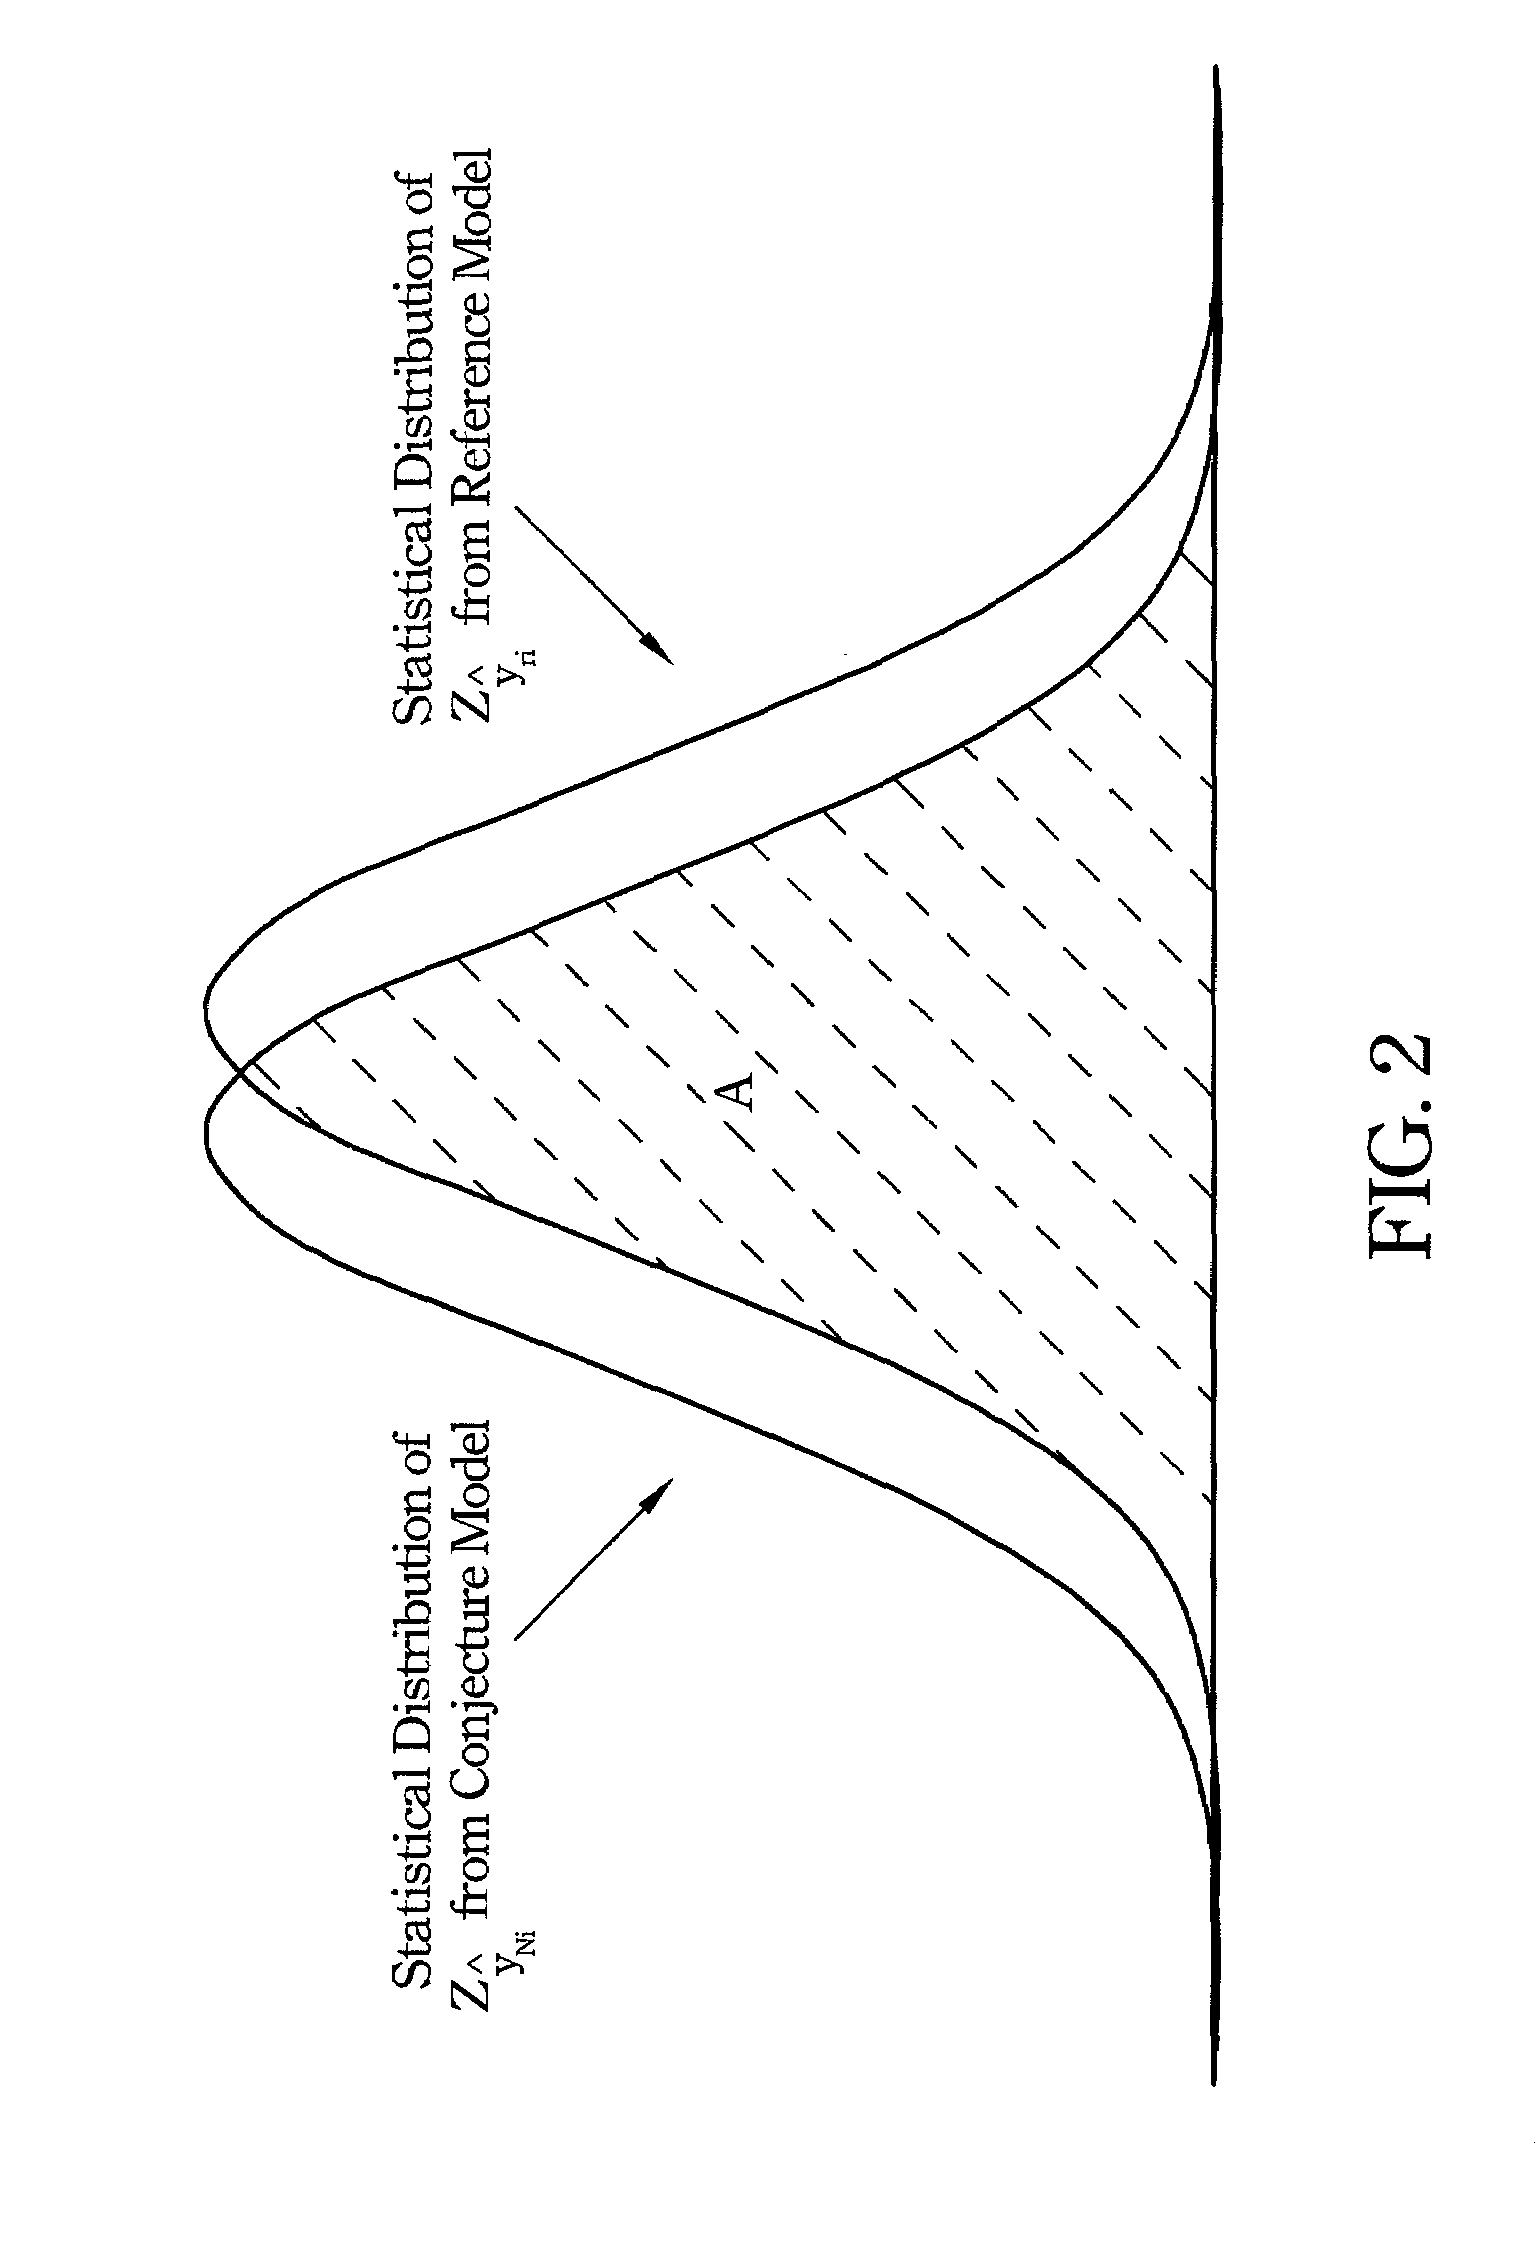 Method for Evaluating Reliance Level of a Virtual Metrology System